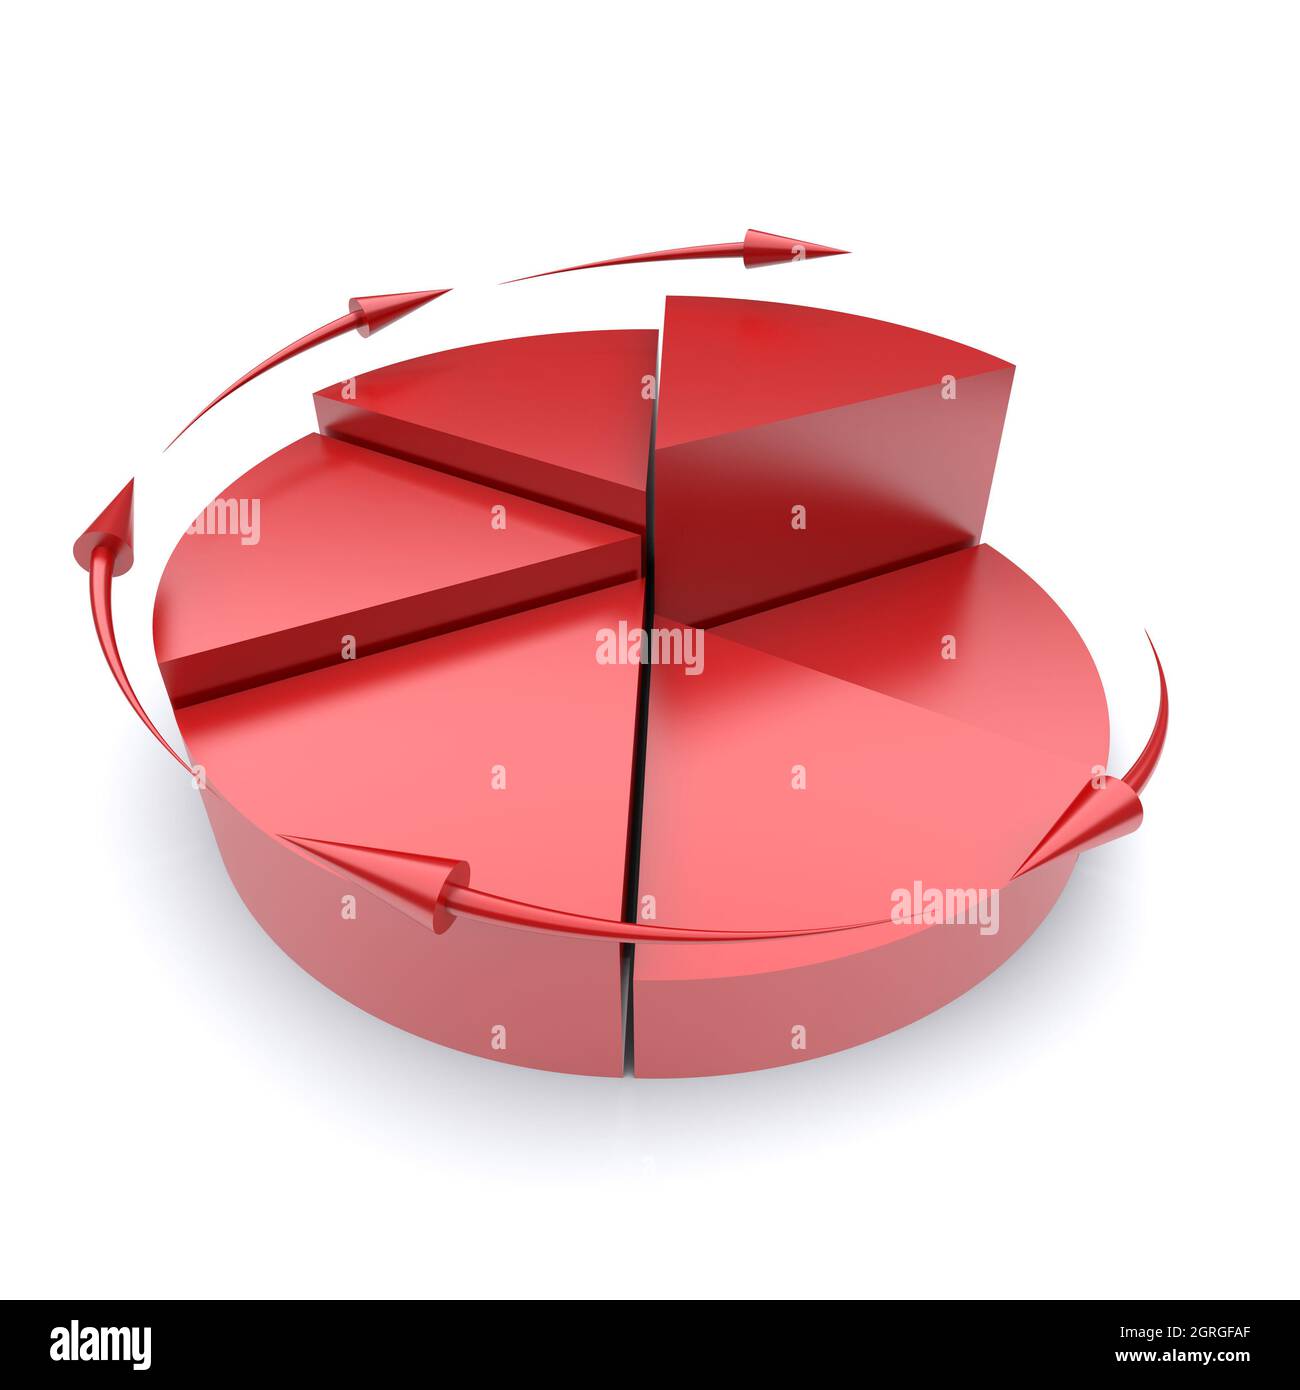 Red pie chart on a white background. 3d rendered image Stock Photo